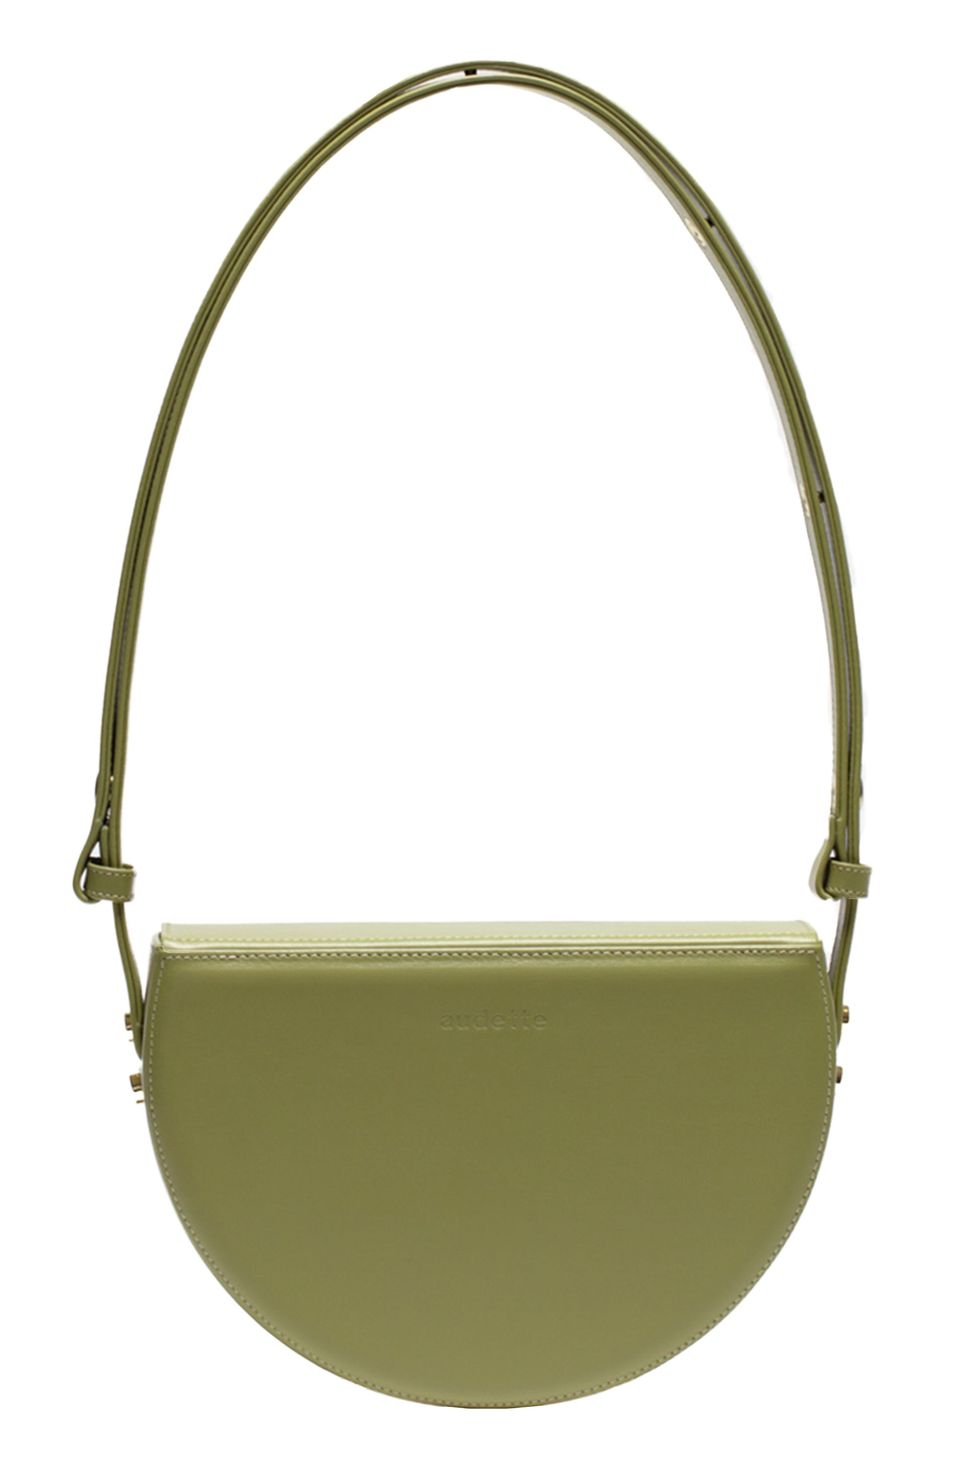 Green with envy: Embrace the green bag trend with bright handbags to buy now